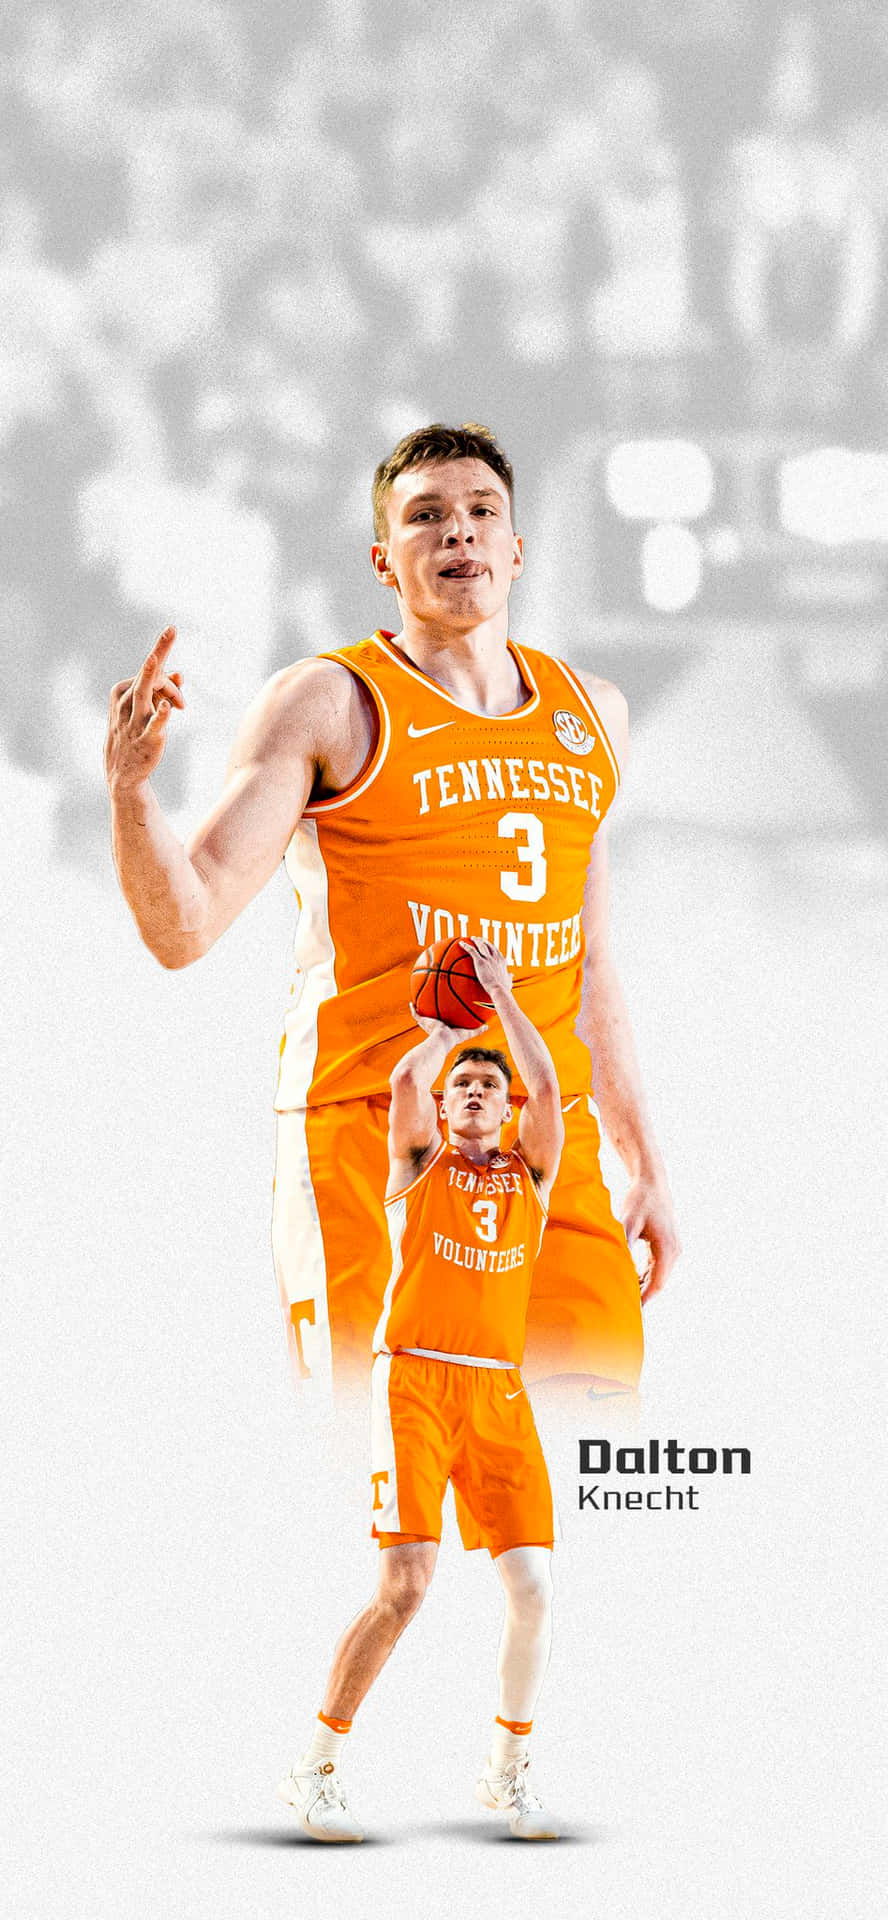 Tennessee Basketball Player Action Shot Wallpaper